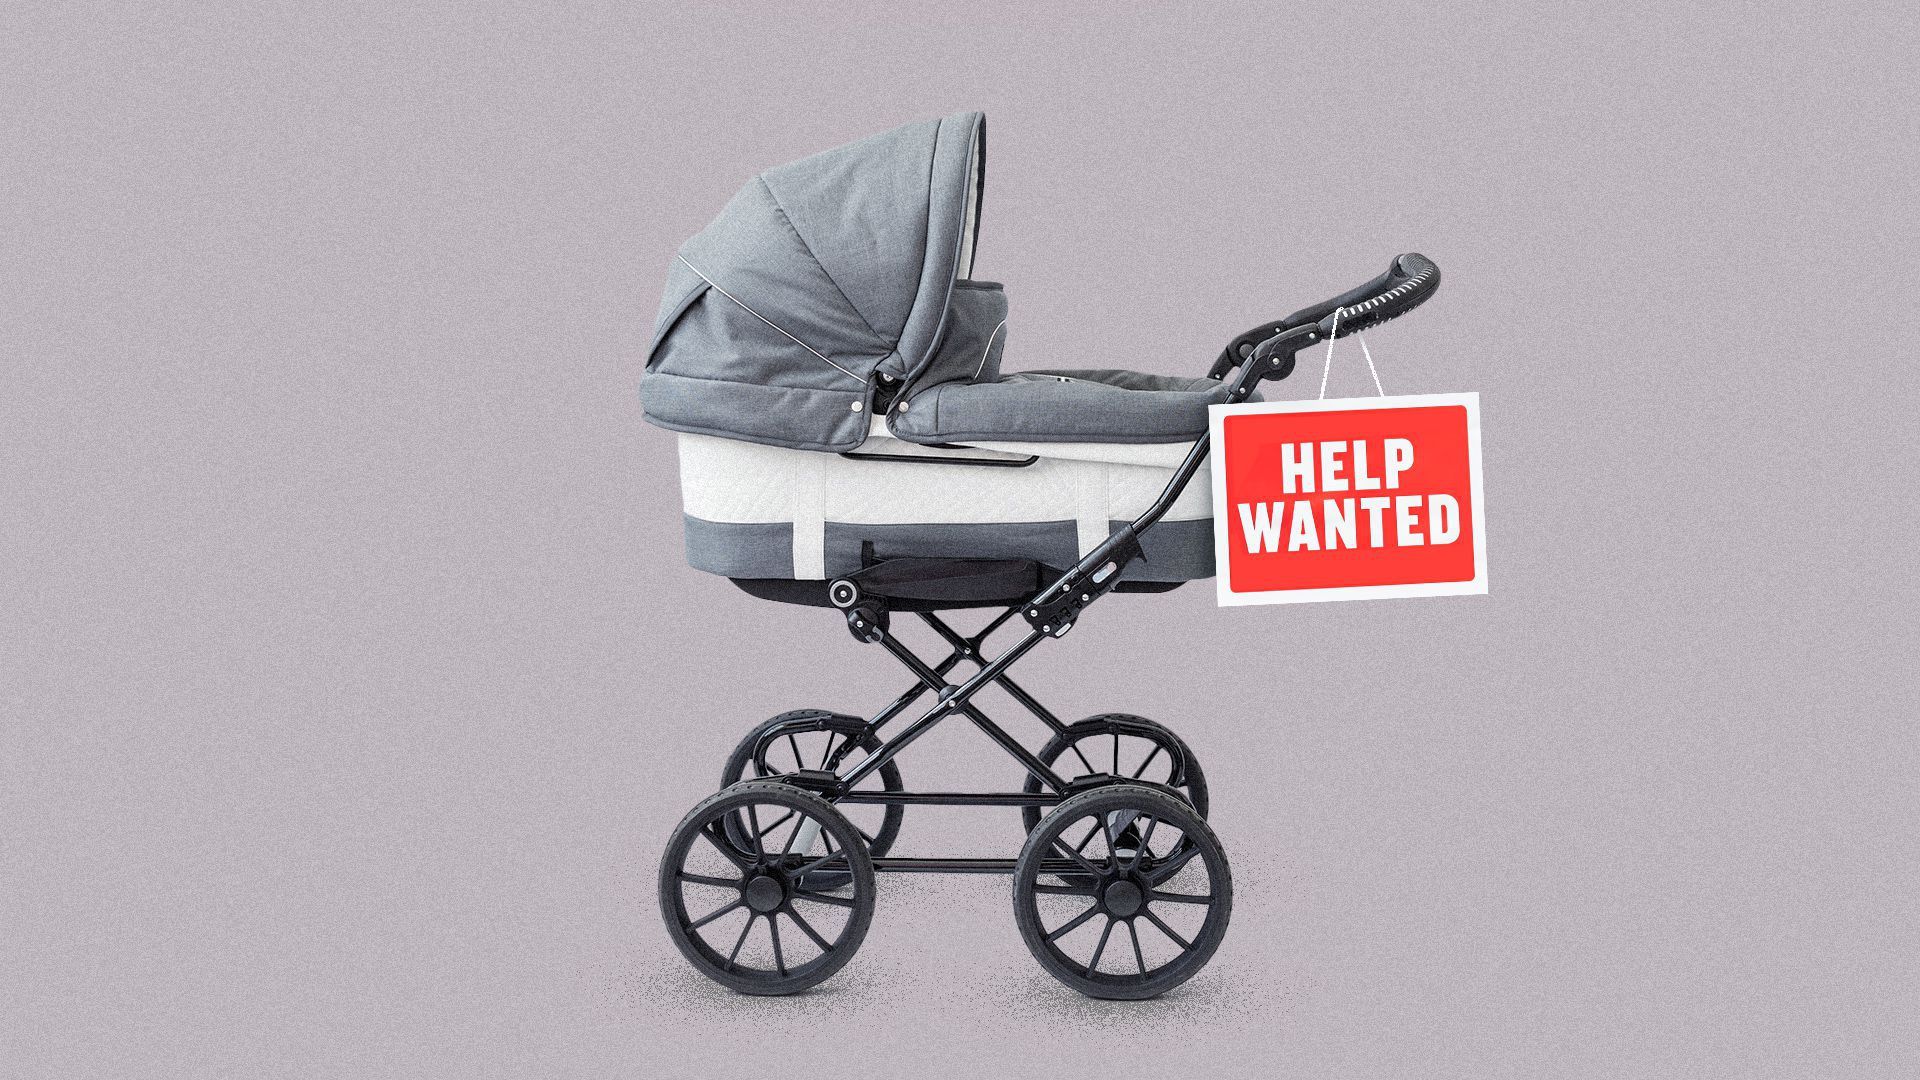 Illustration of a child's stroller with a Help Wanted sign hanging from it